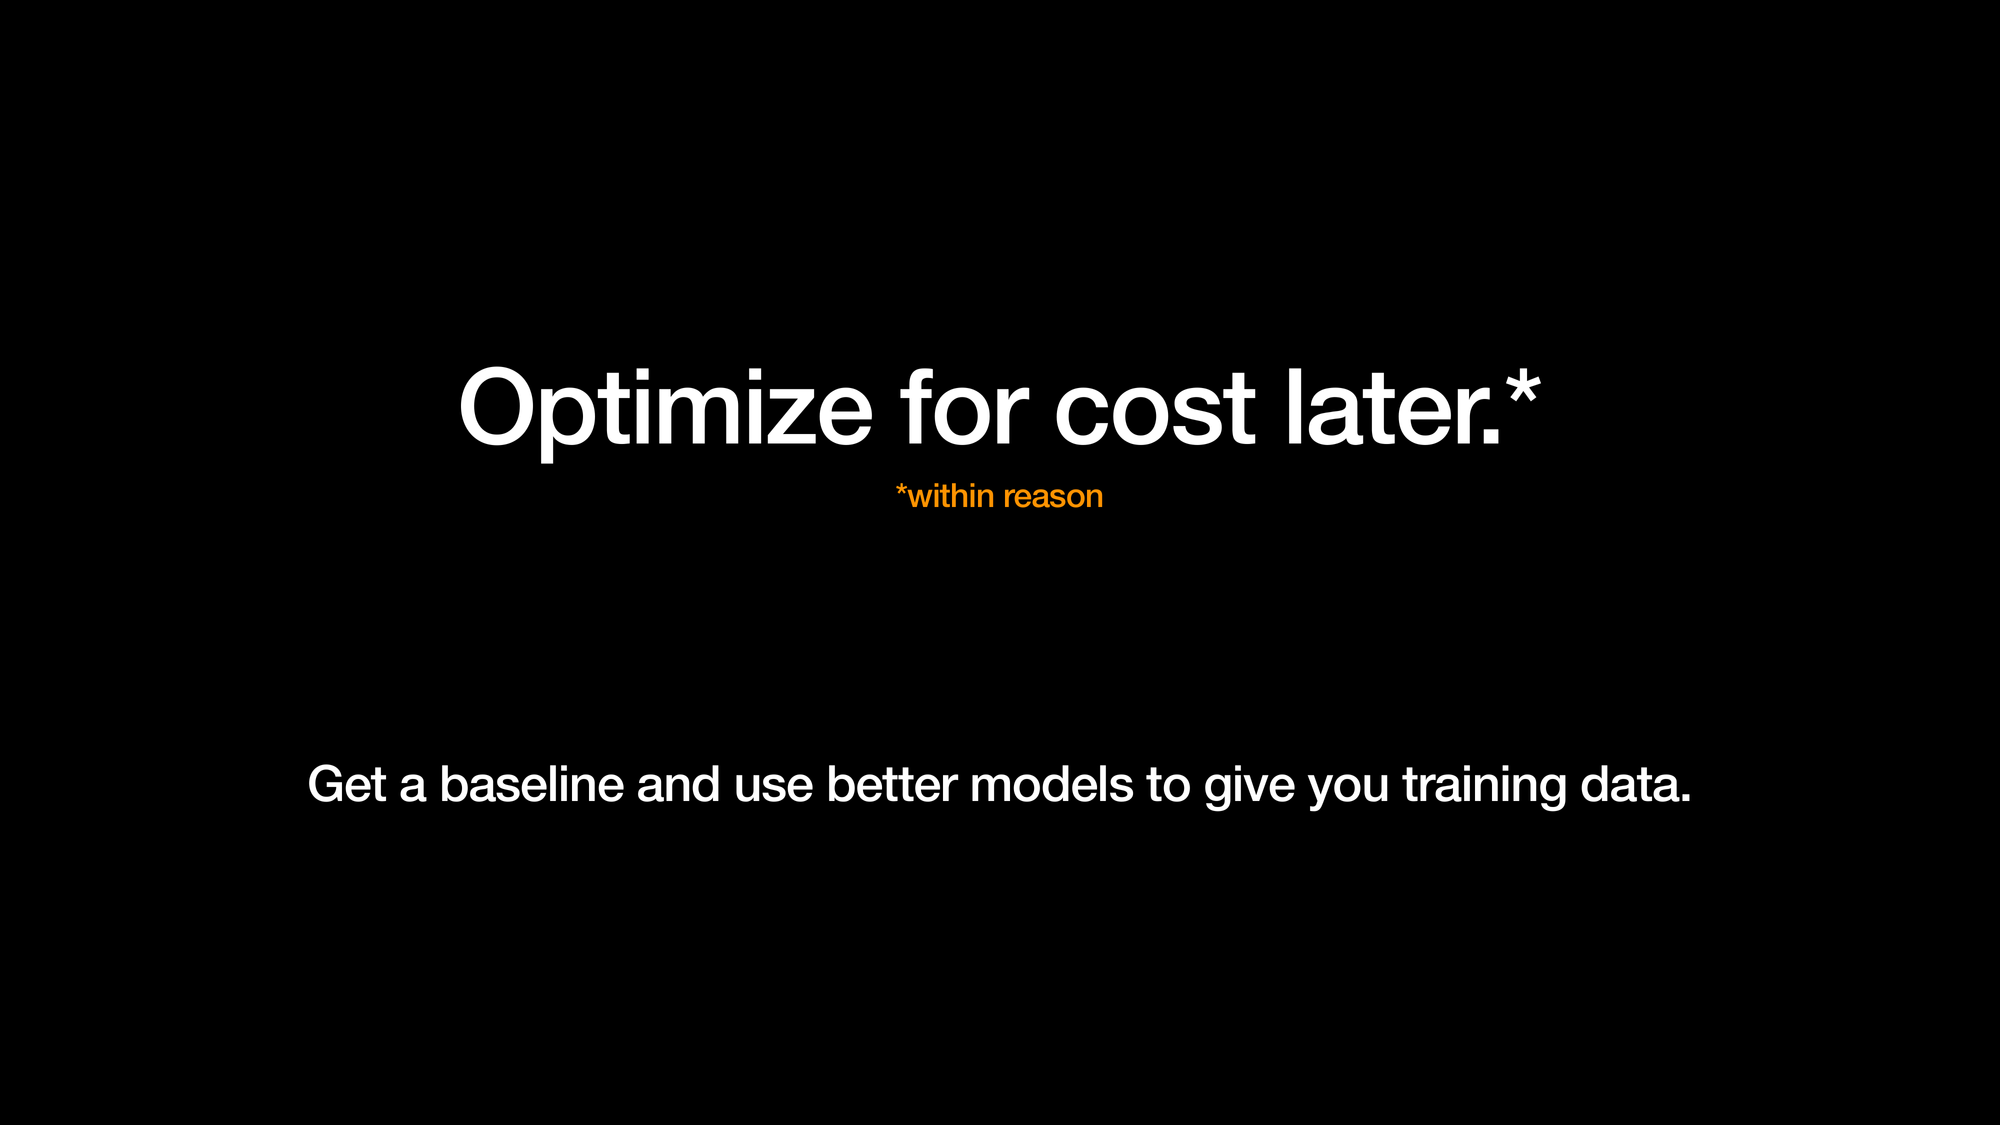 Optimize for cost later. Get a baseline and use better models to give you training data.